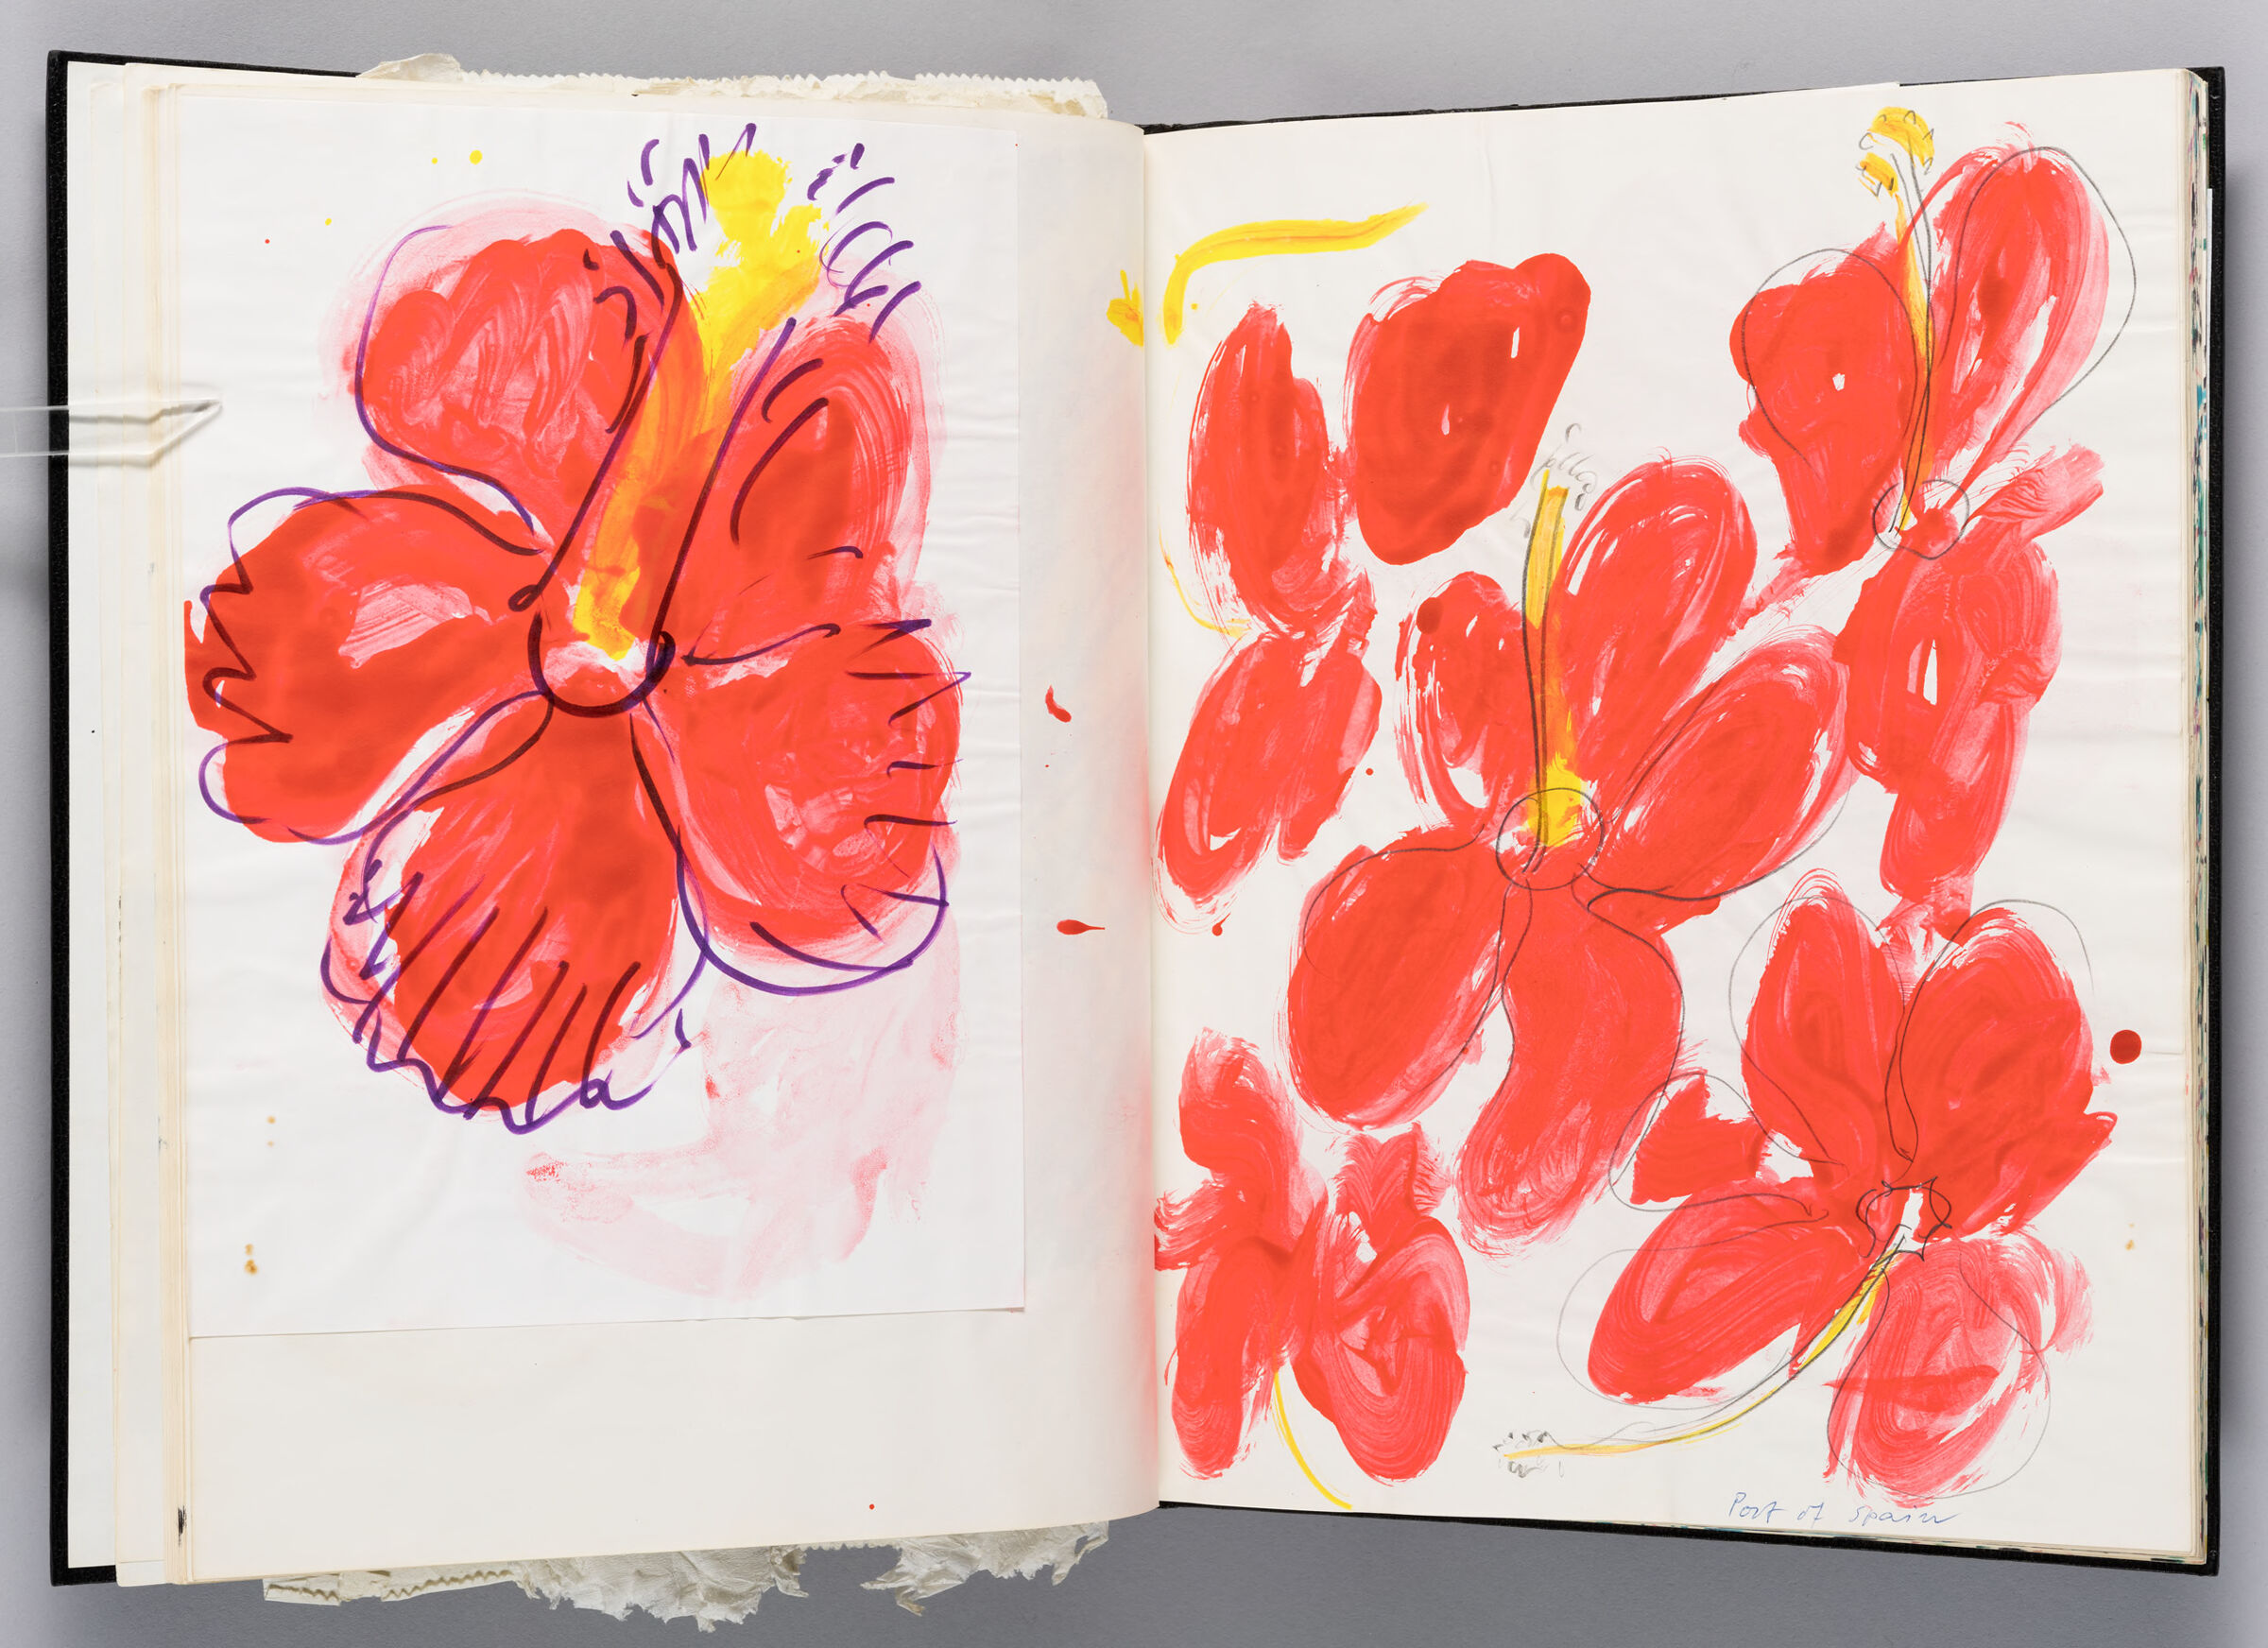 Untitled (Bleed-Through Of Previous Page And Adhered Sketch Of Hibiscus, Left Page); Untitled (Hibiscus Flowers, Right Page)